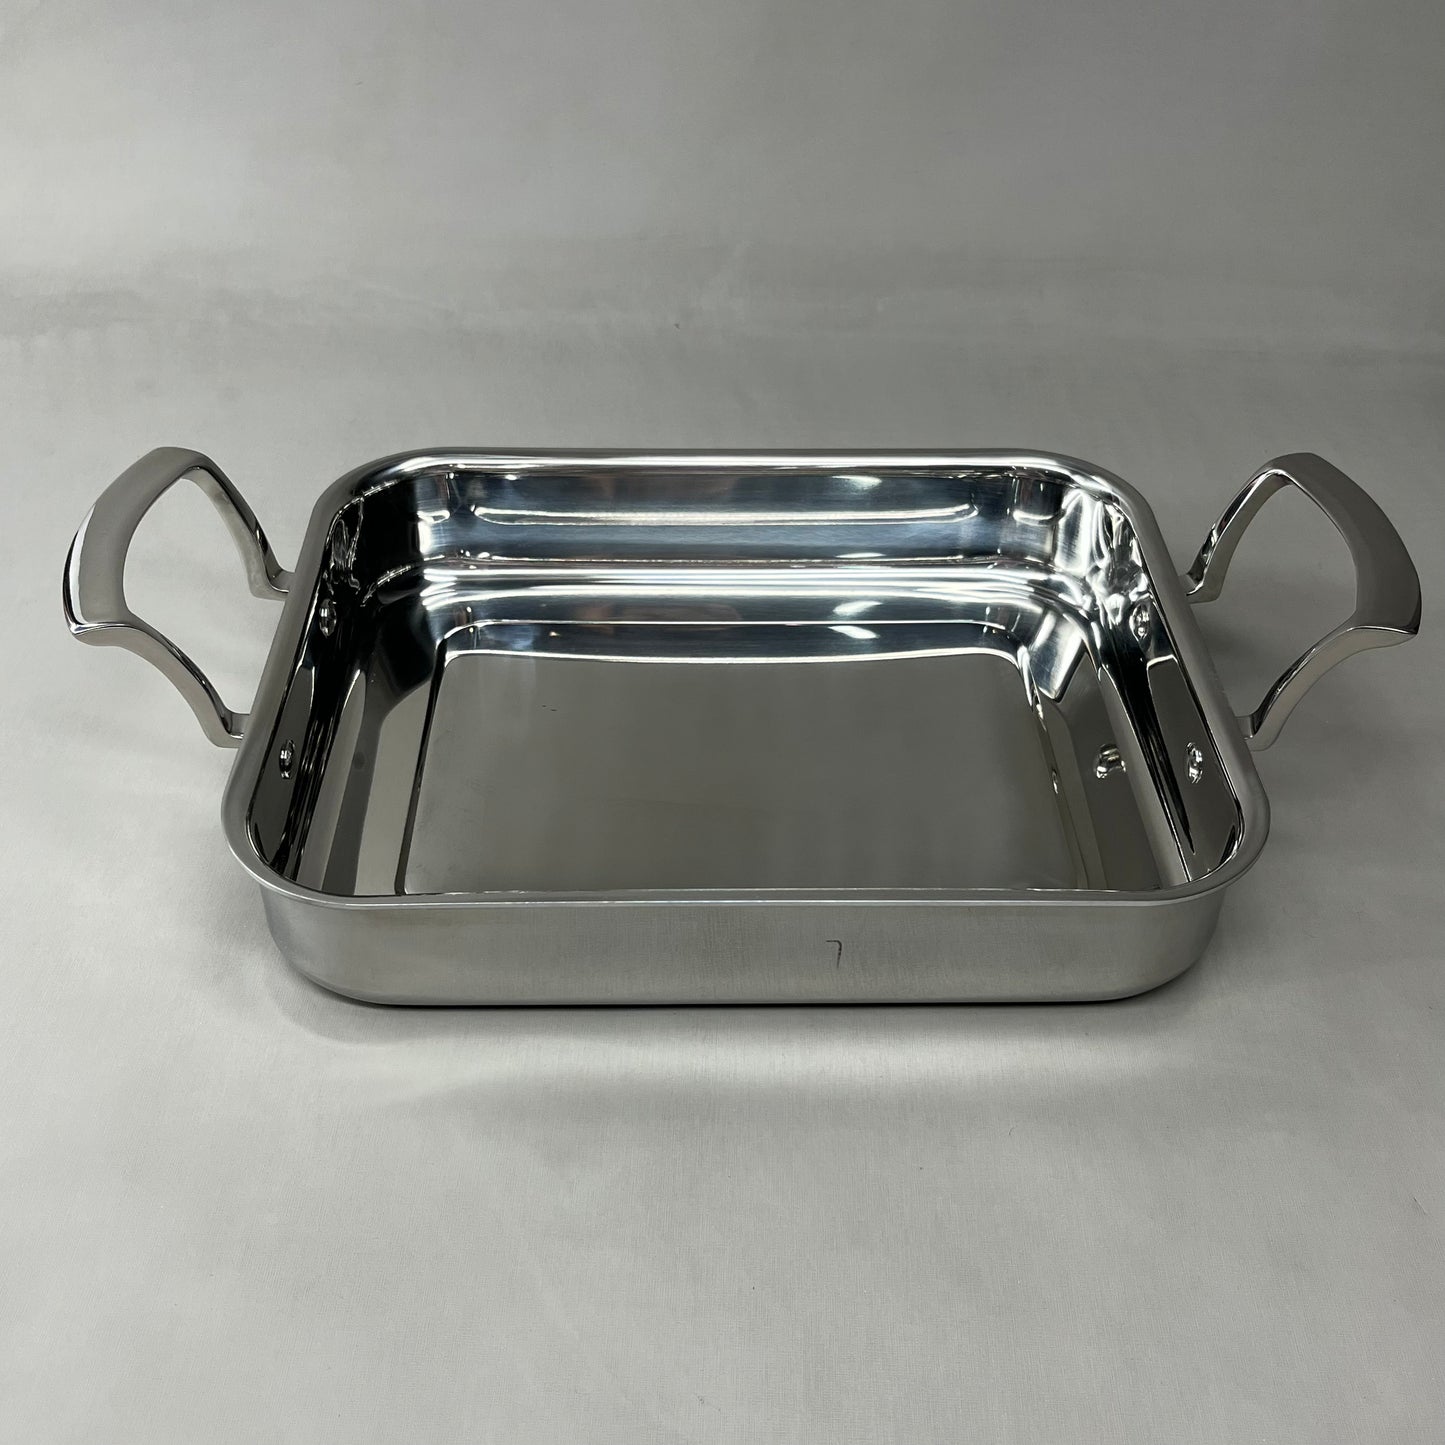 BROWNE Thermalloy Square Stainless Steel Roast Pan 5724175 (New)